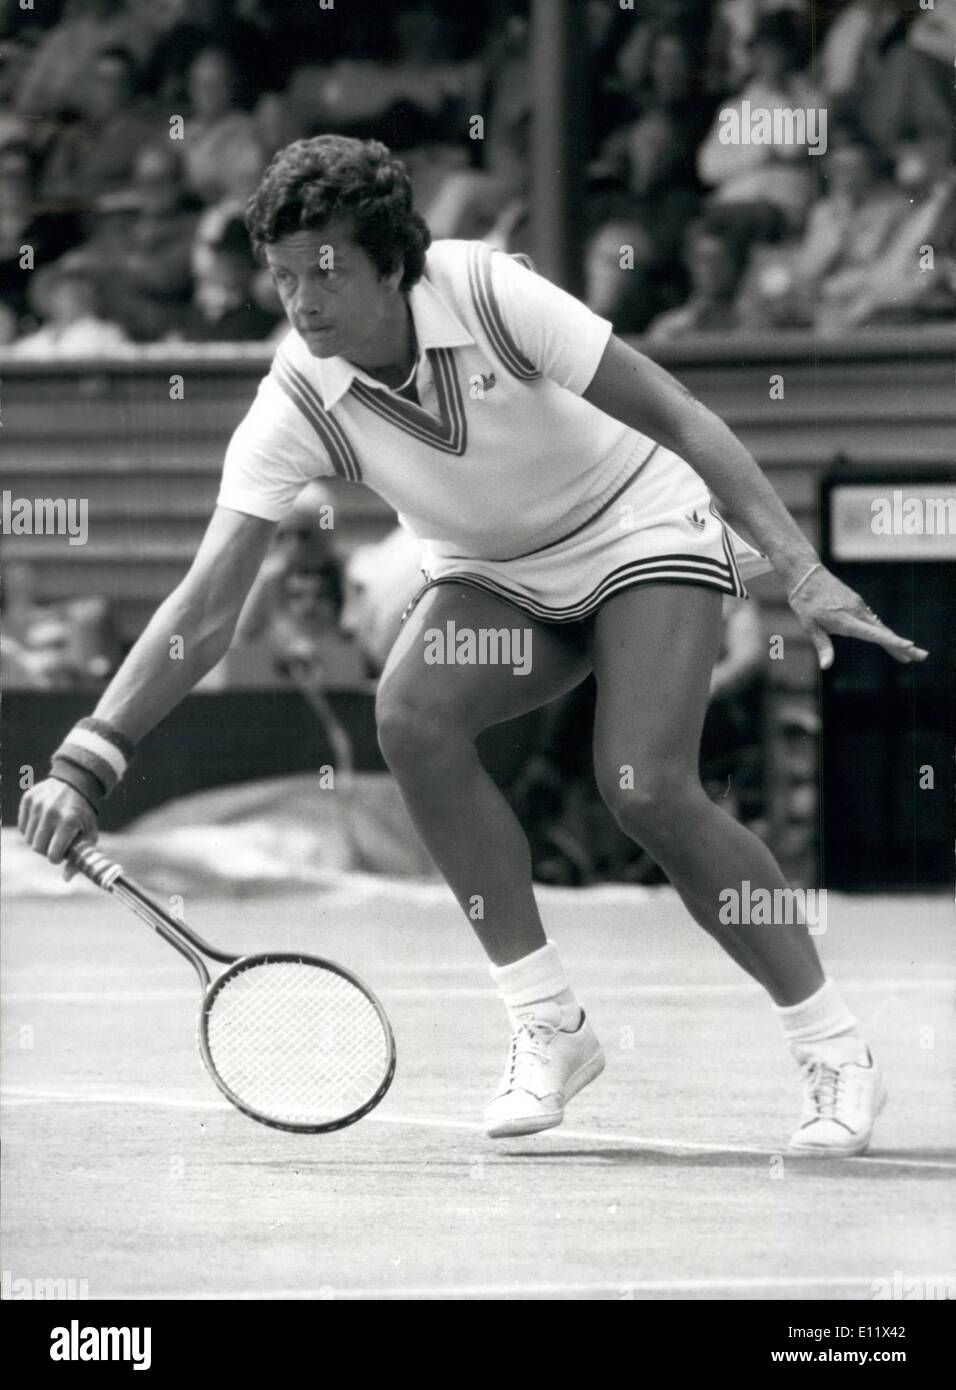 Jun. 19, 1980 - June 19th 1980 Betty Stove beats Martina Navratilova. Betty Stove, the 34 year Dutch tennis star put out the world's no. 1 tennis player, Martina Navratilova in the first round of the BMW Championships at Eastbourne yesterday, 6-3,3-6,7-5. Photo Shows: Betty Stove in action against Martina Navratilova whom she beat at Eastbourne yesterday. Stock Photo